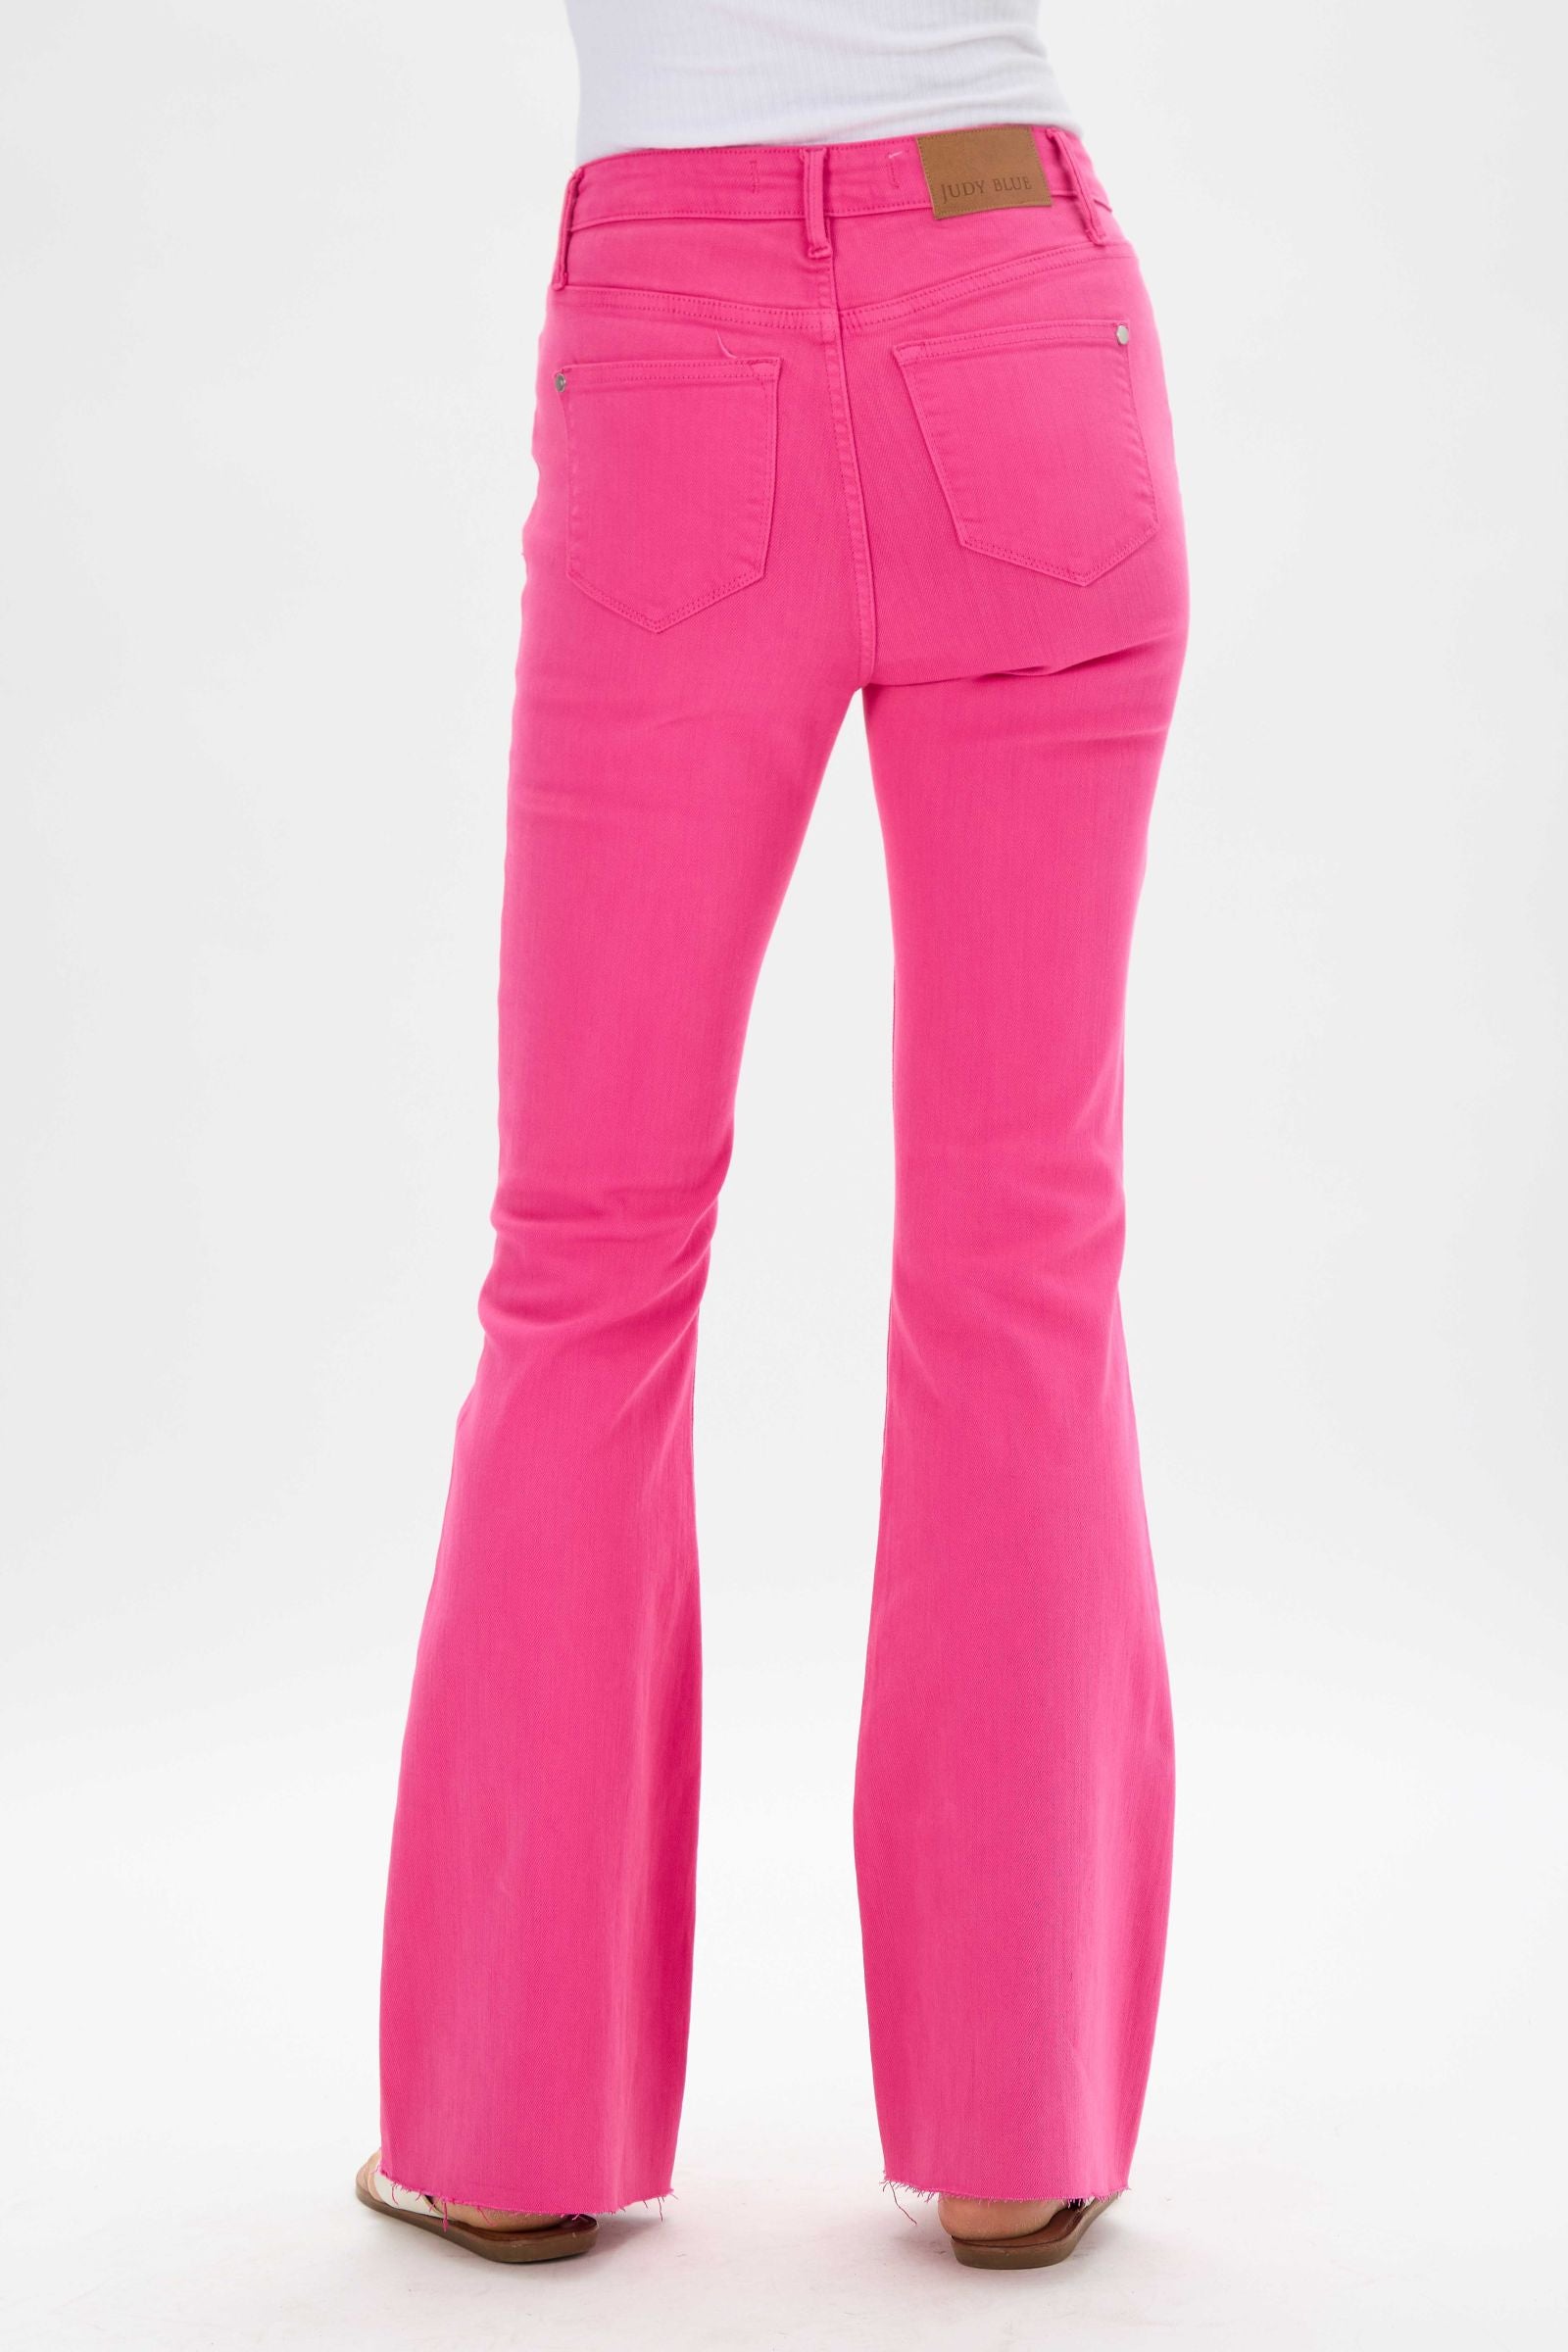 SPRING CLEANING Judy Blue Hot Pink HW Hem Flare - Curvy Size